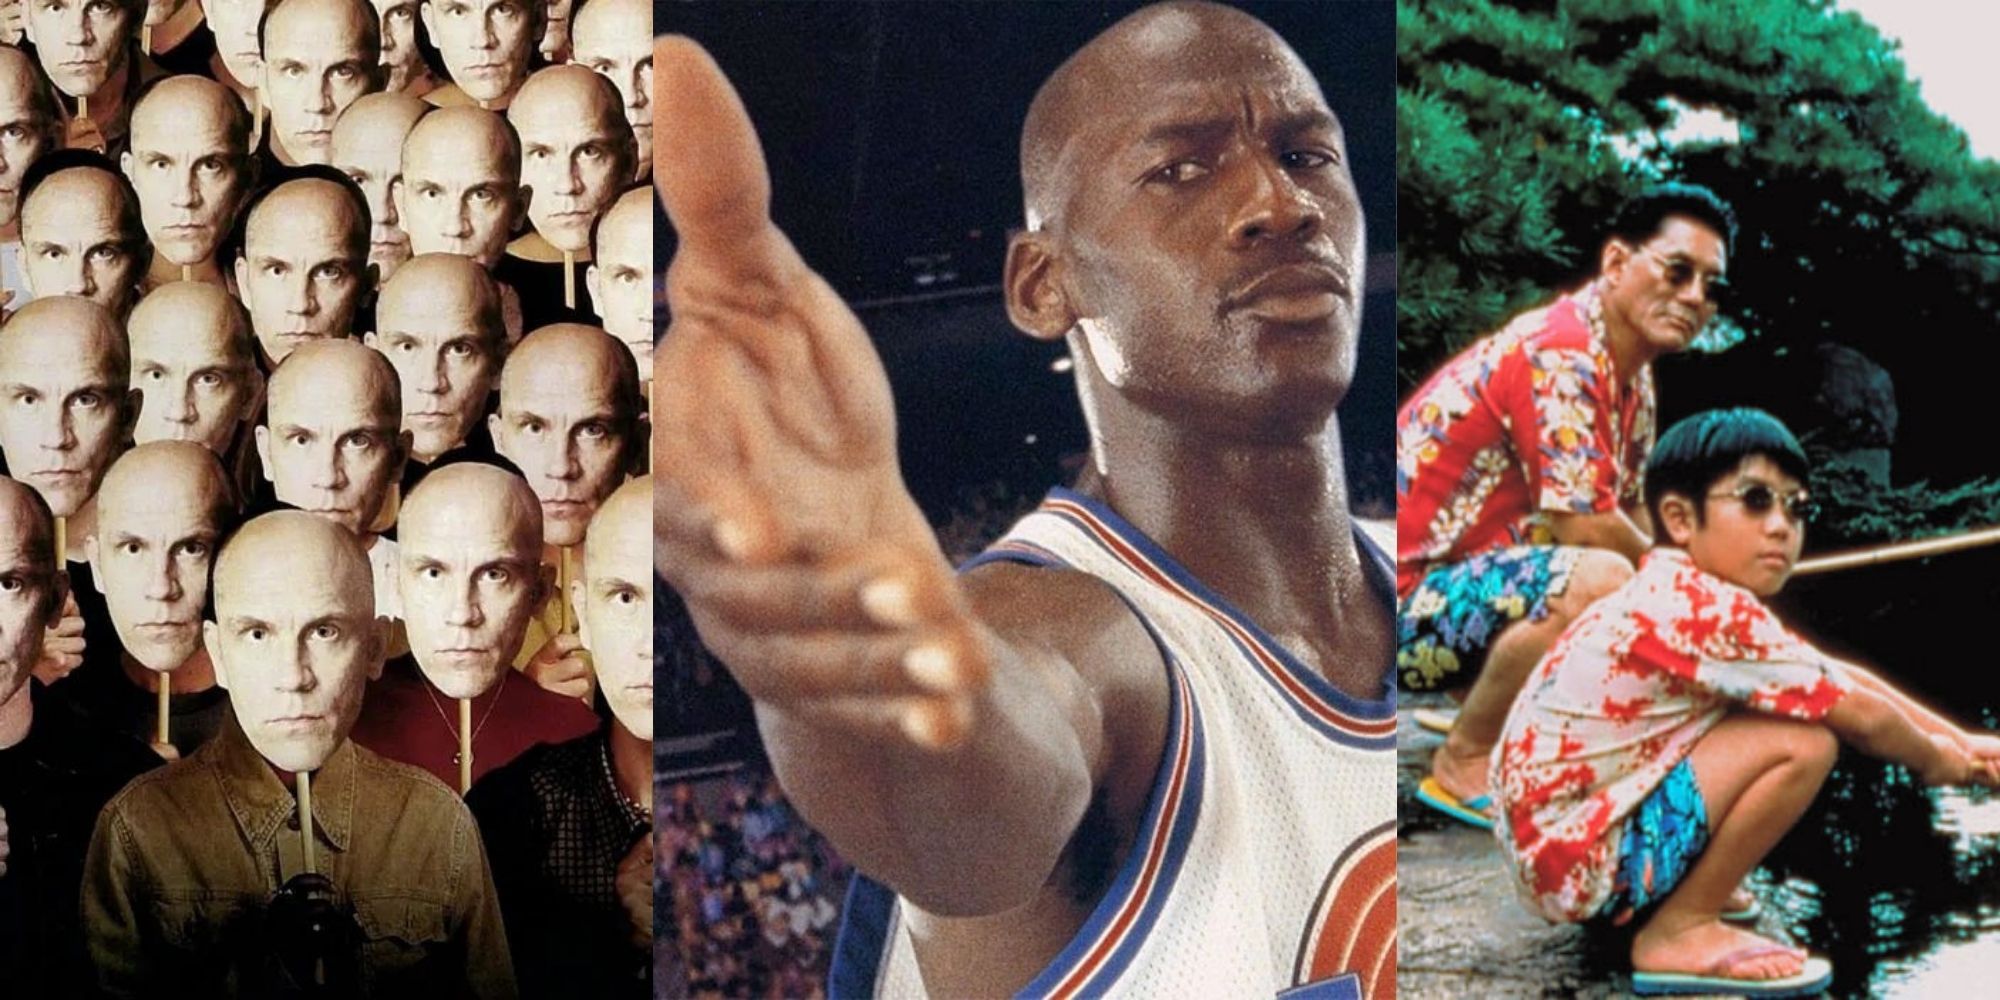 A collage of Being John Malkovich, Space Jam and Kikujiro